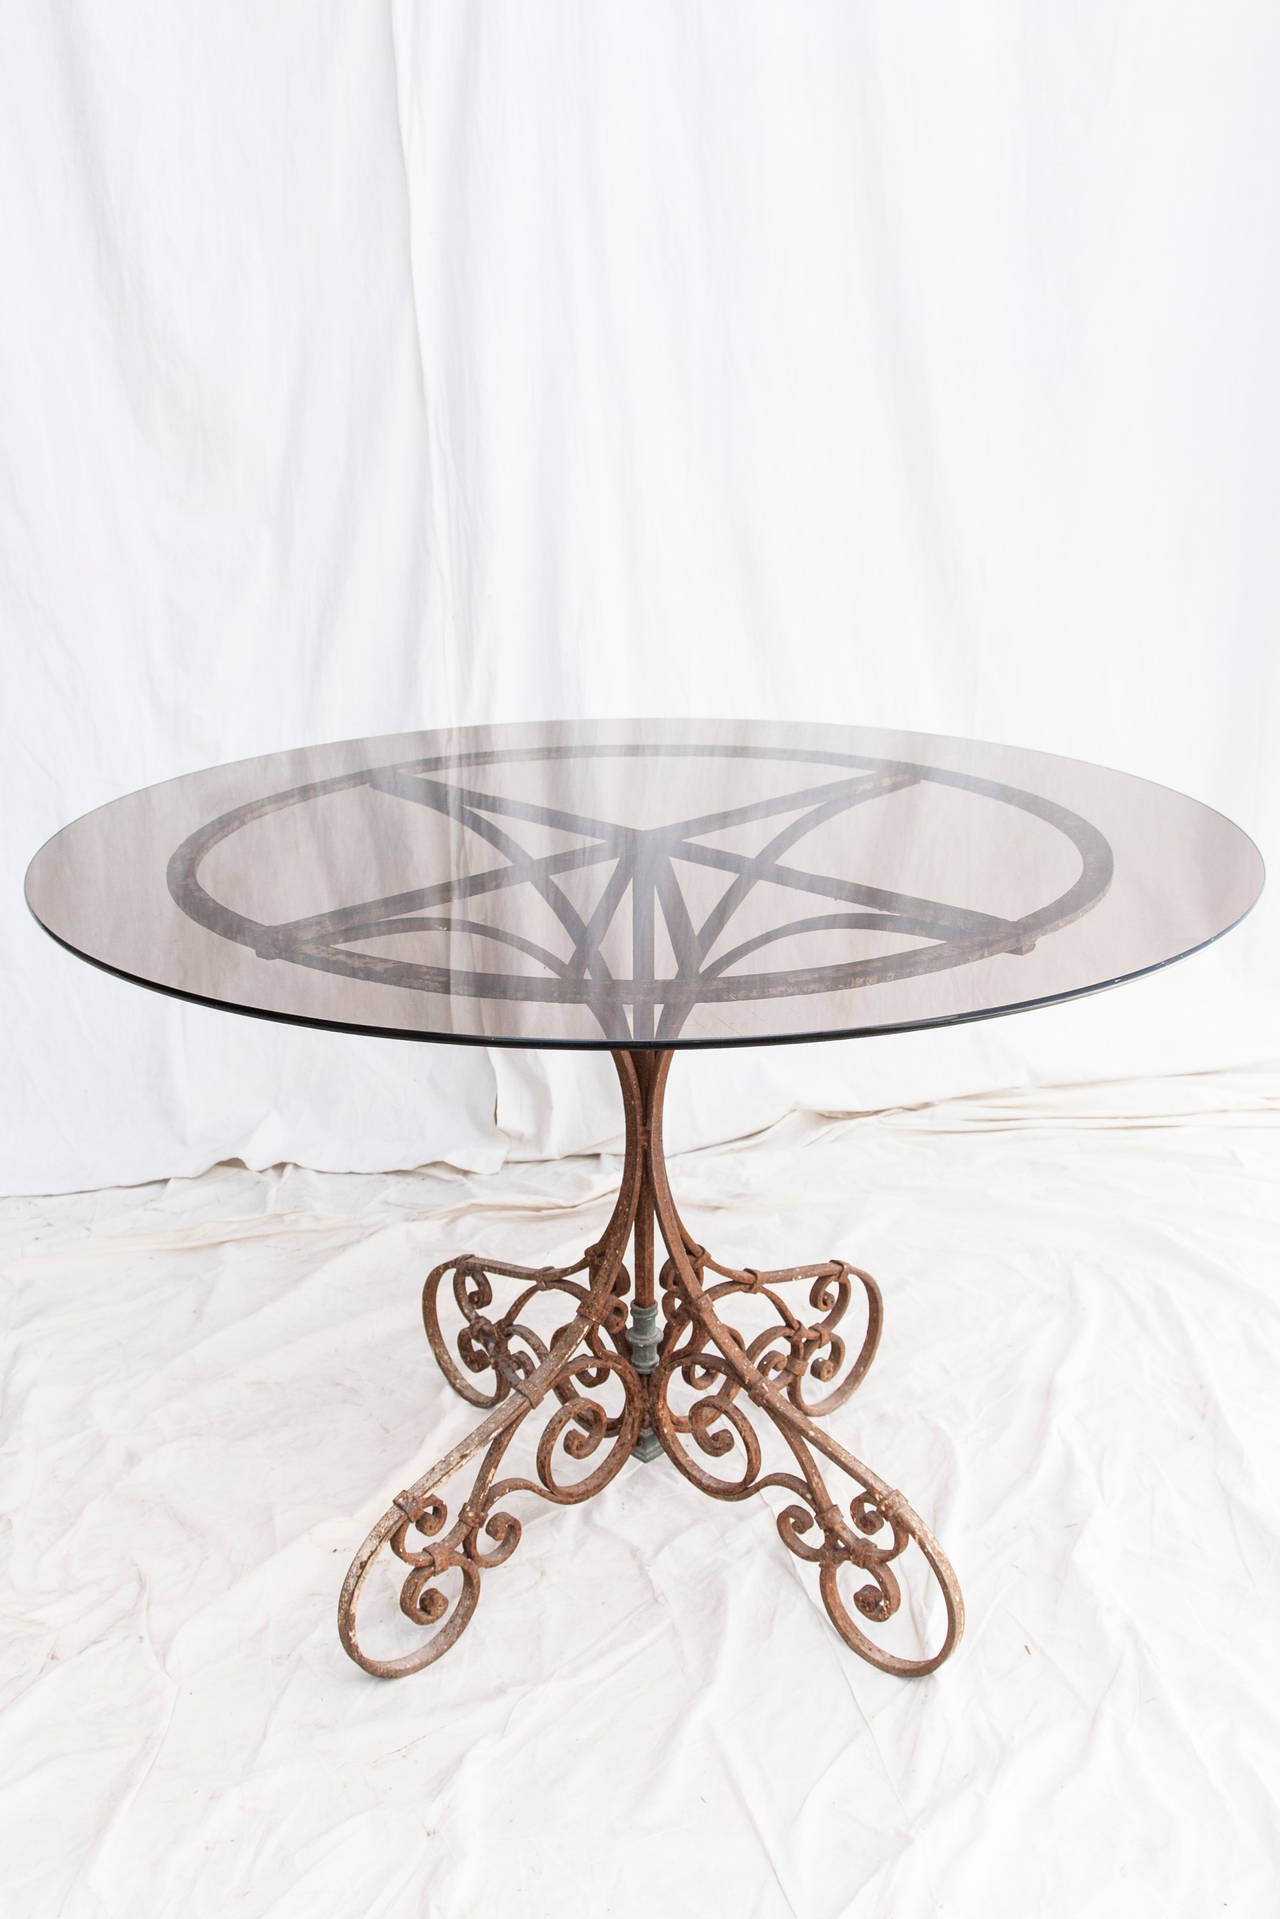 19th Century French Hand-Forged, Aged Iron Table with Smoked Glass 3